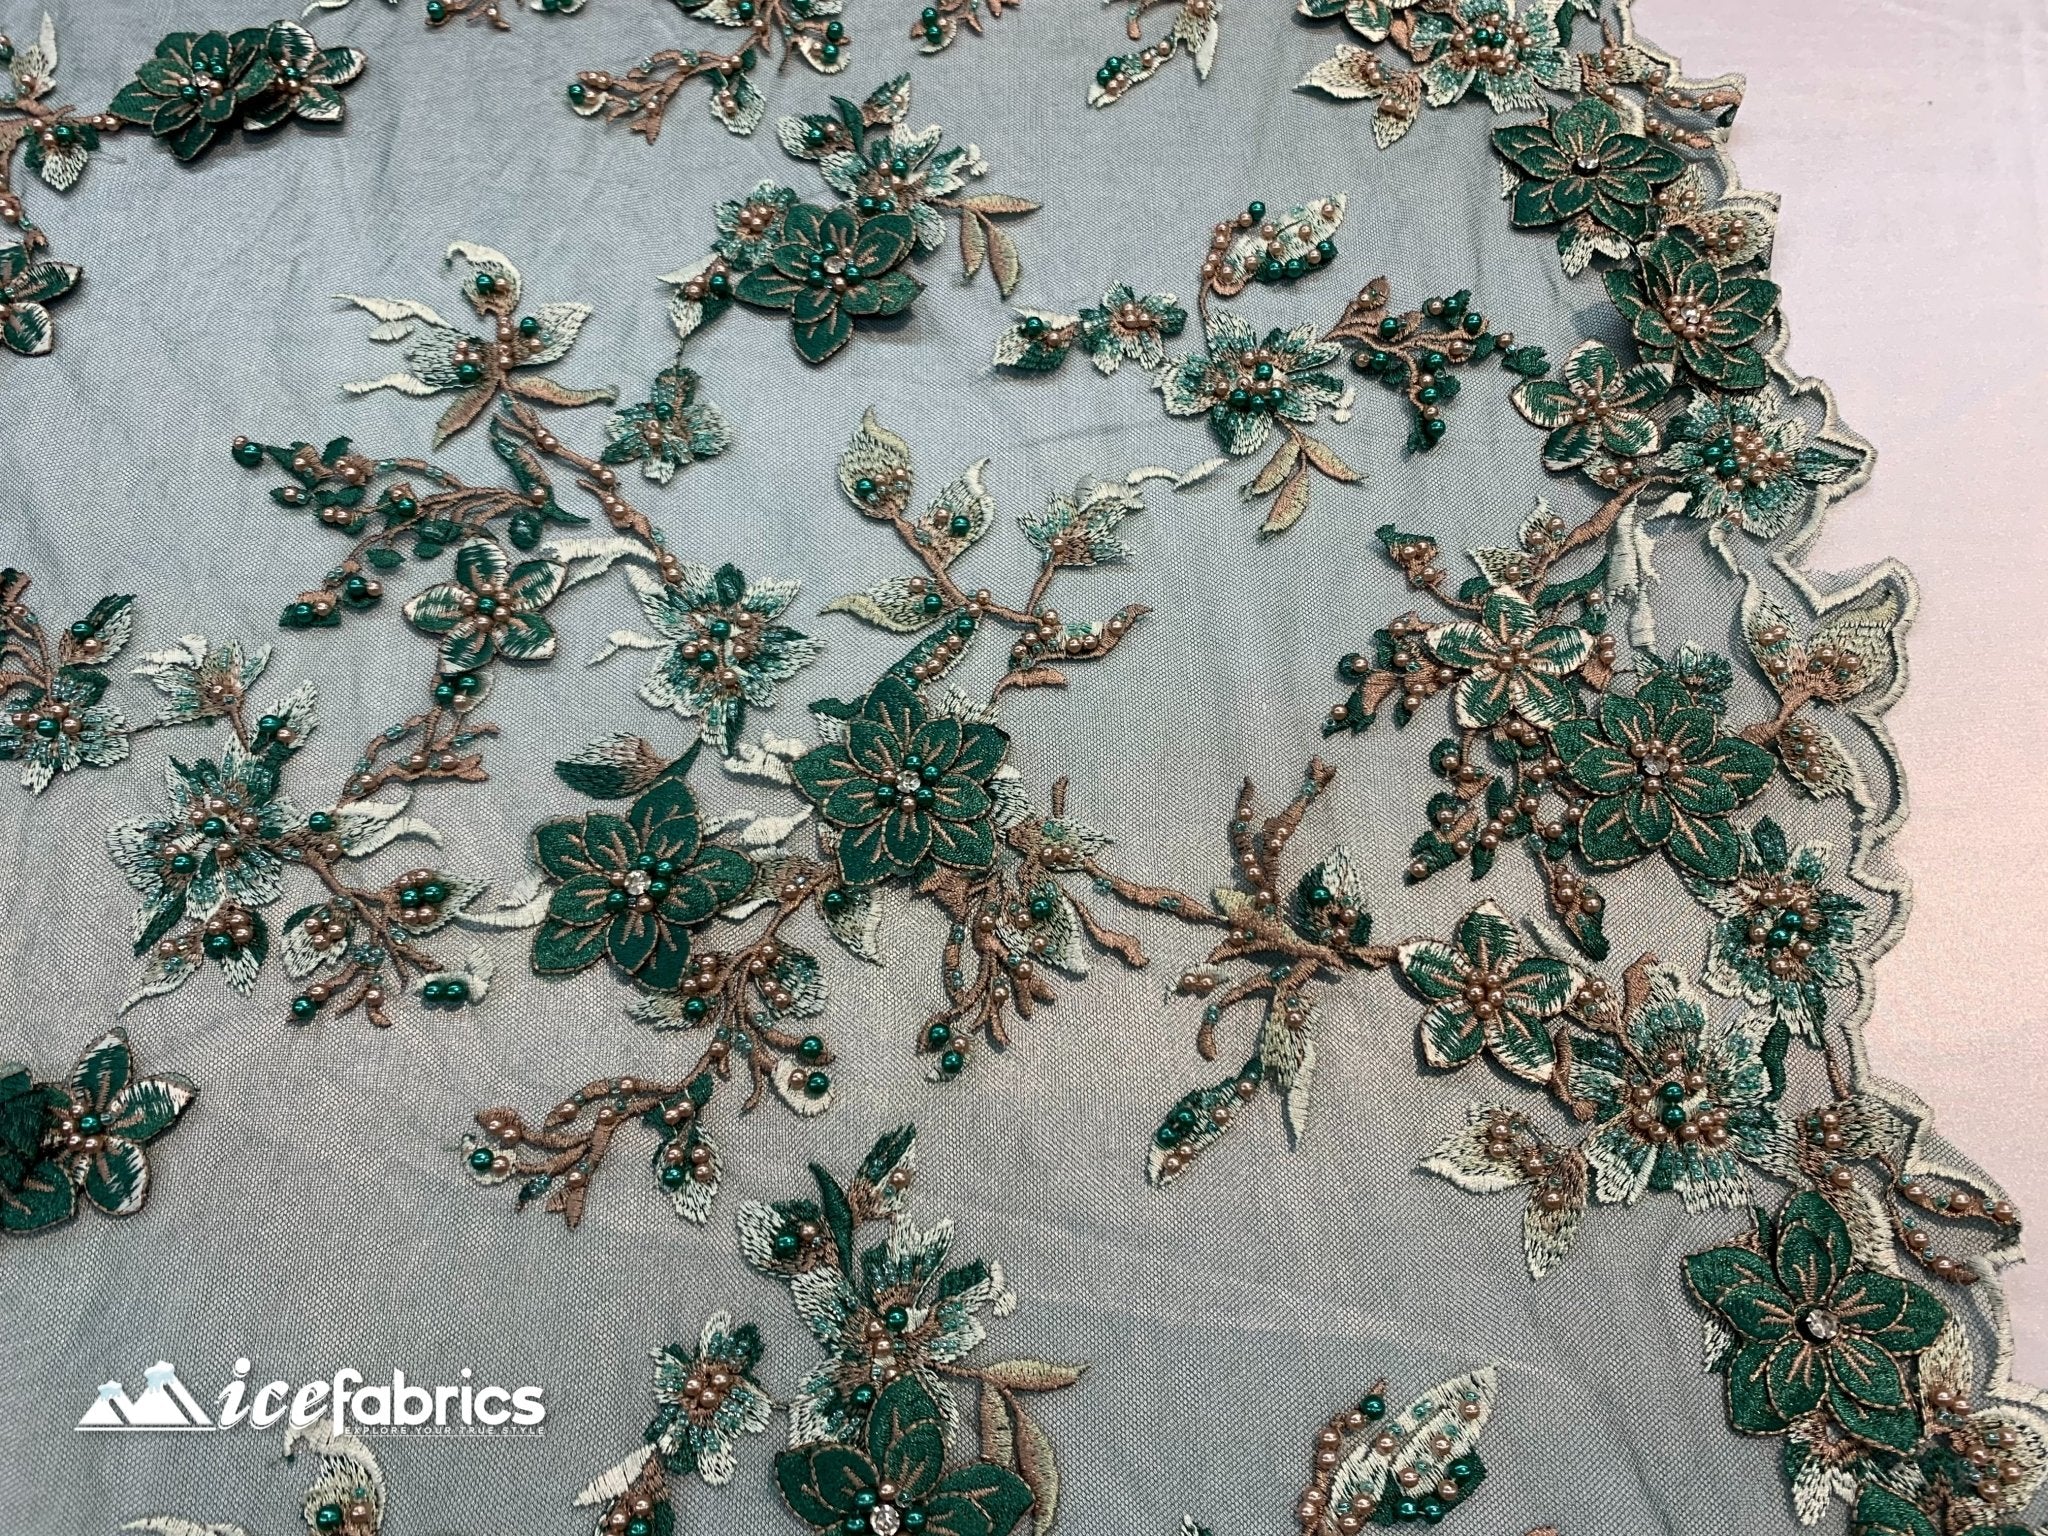 Embroidered Fabric/ 3D Flowers Beaded Fabric/ Lace Fabric/ Hunter GreenICE FABRICSICE FABRICSHunter GreenEmbroidered Fabric/ 3D Flowers Beaded Fabric/ Lace Fabric/ Hunter Green ICE FABRICS